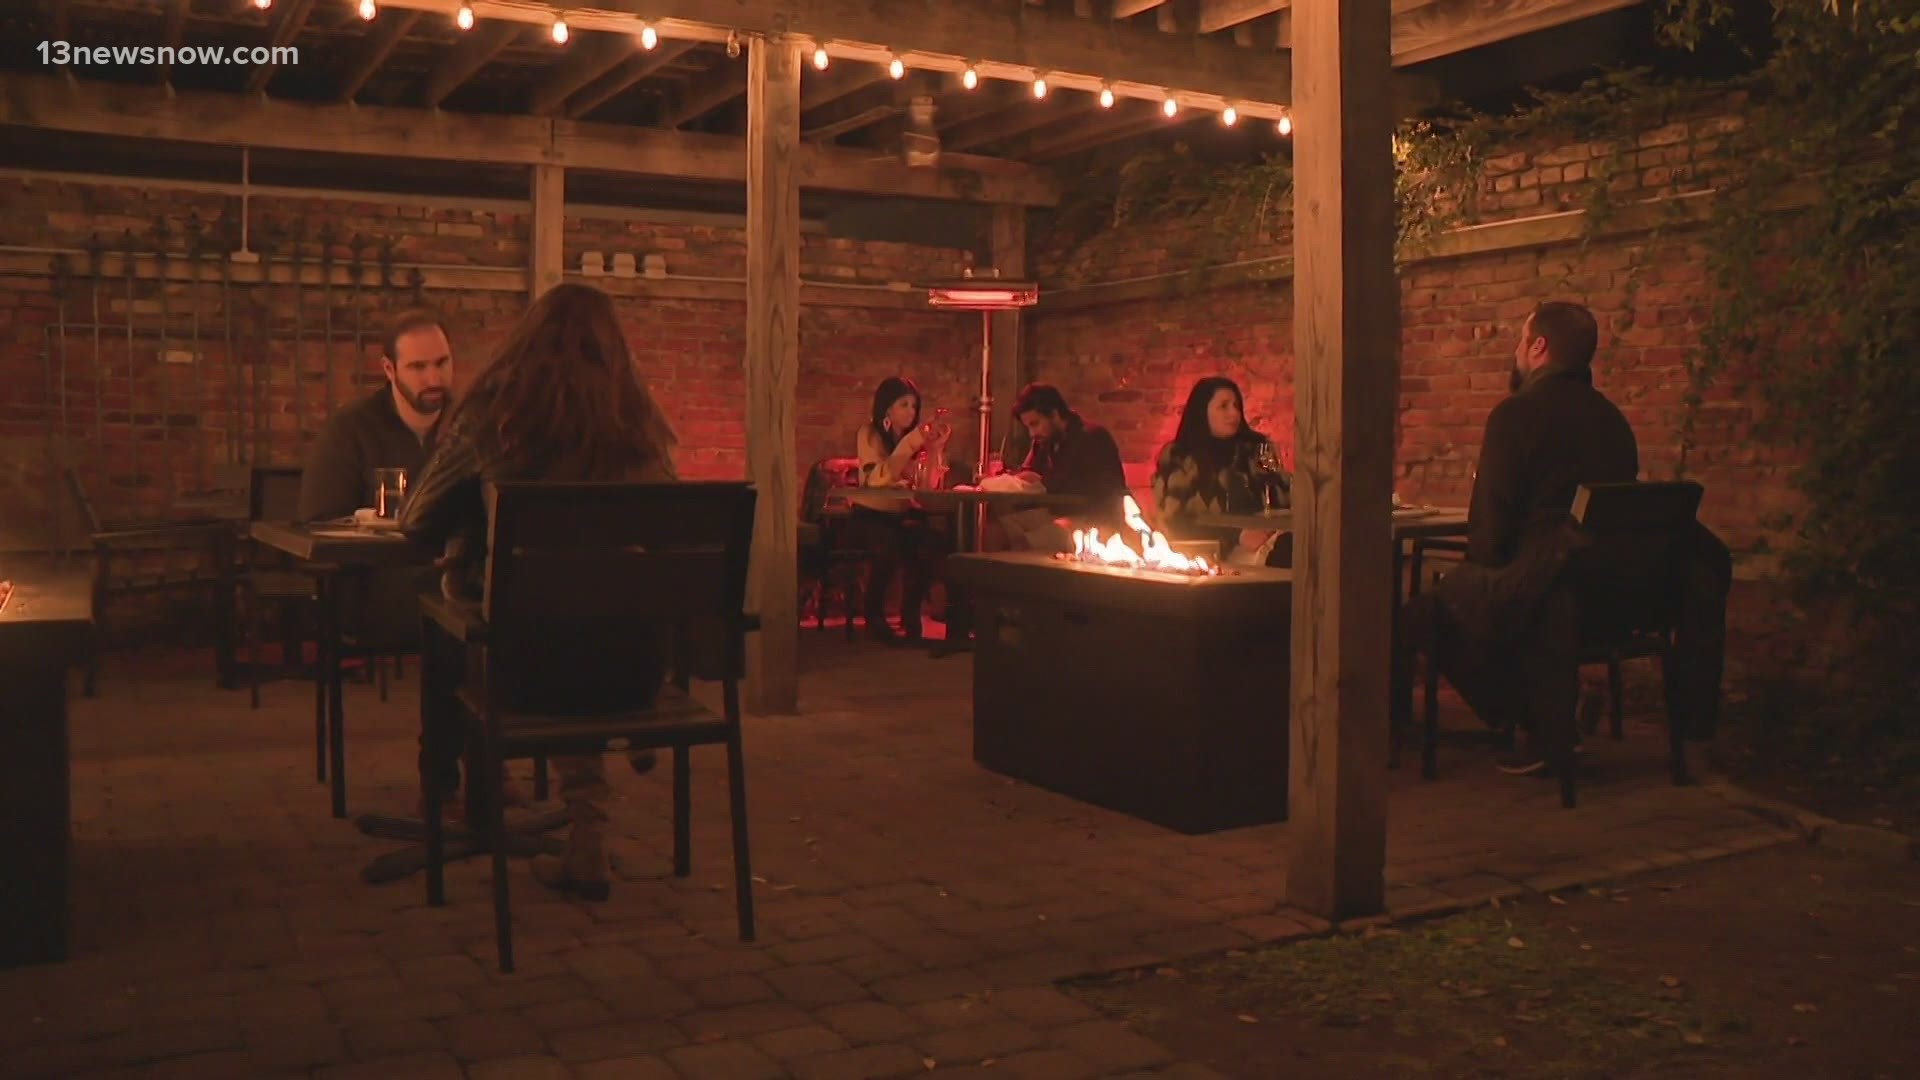 Restaurant owners say there are still some kinks to work out with the city's outdoor heaters, including electrical upgrades and power extensions.